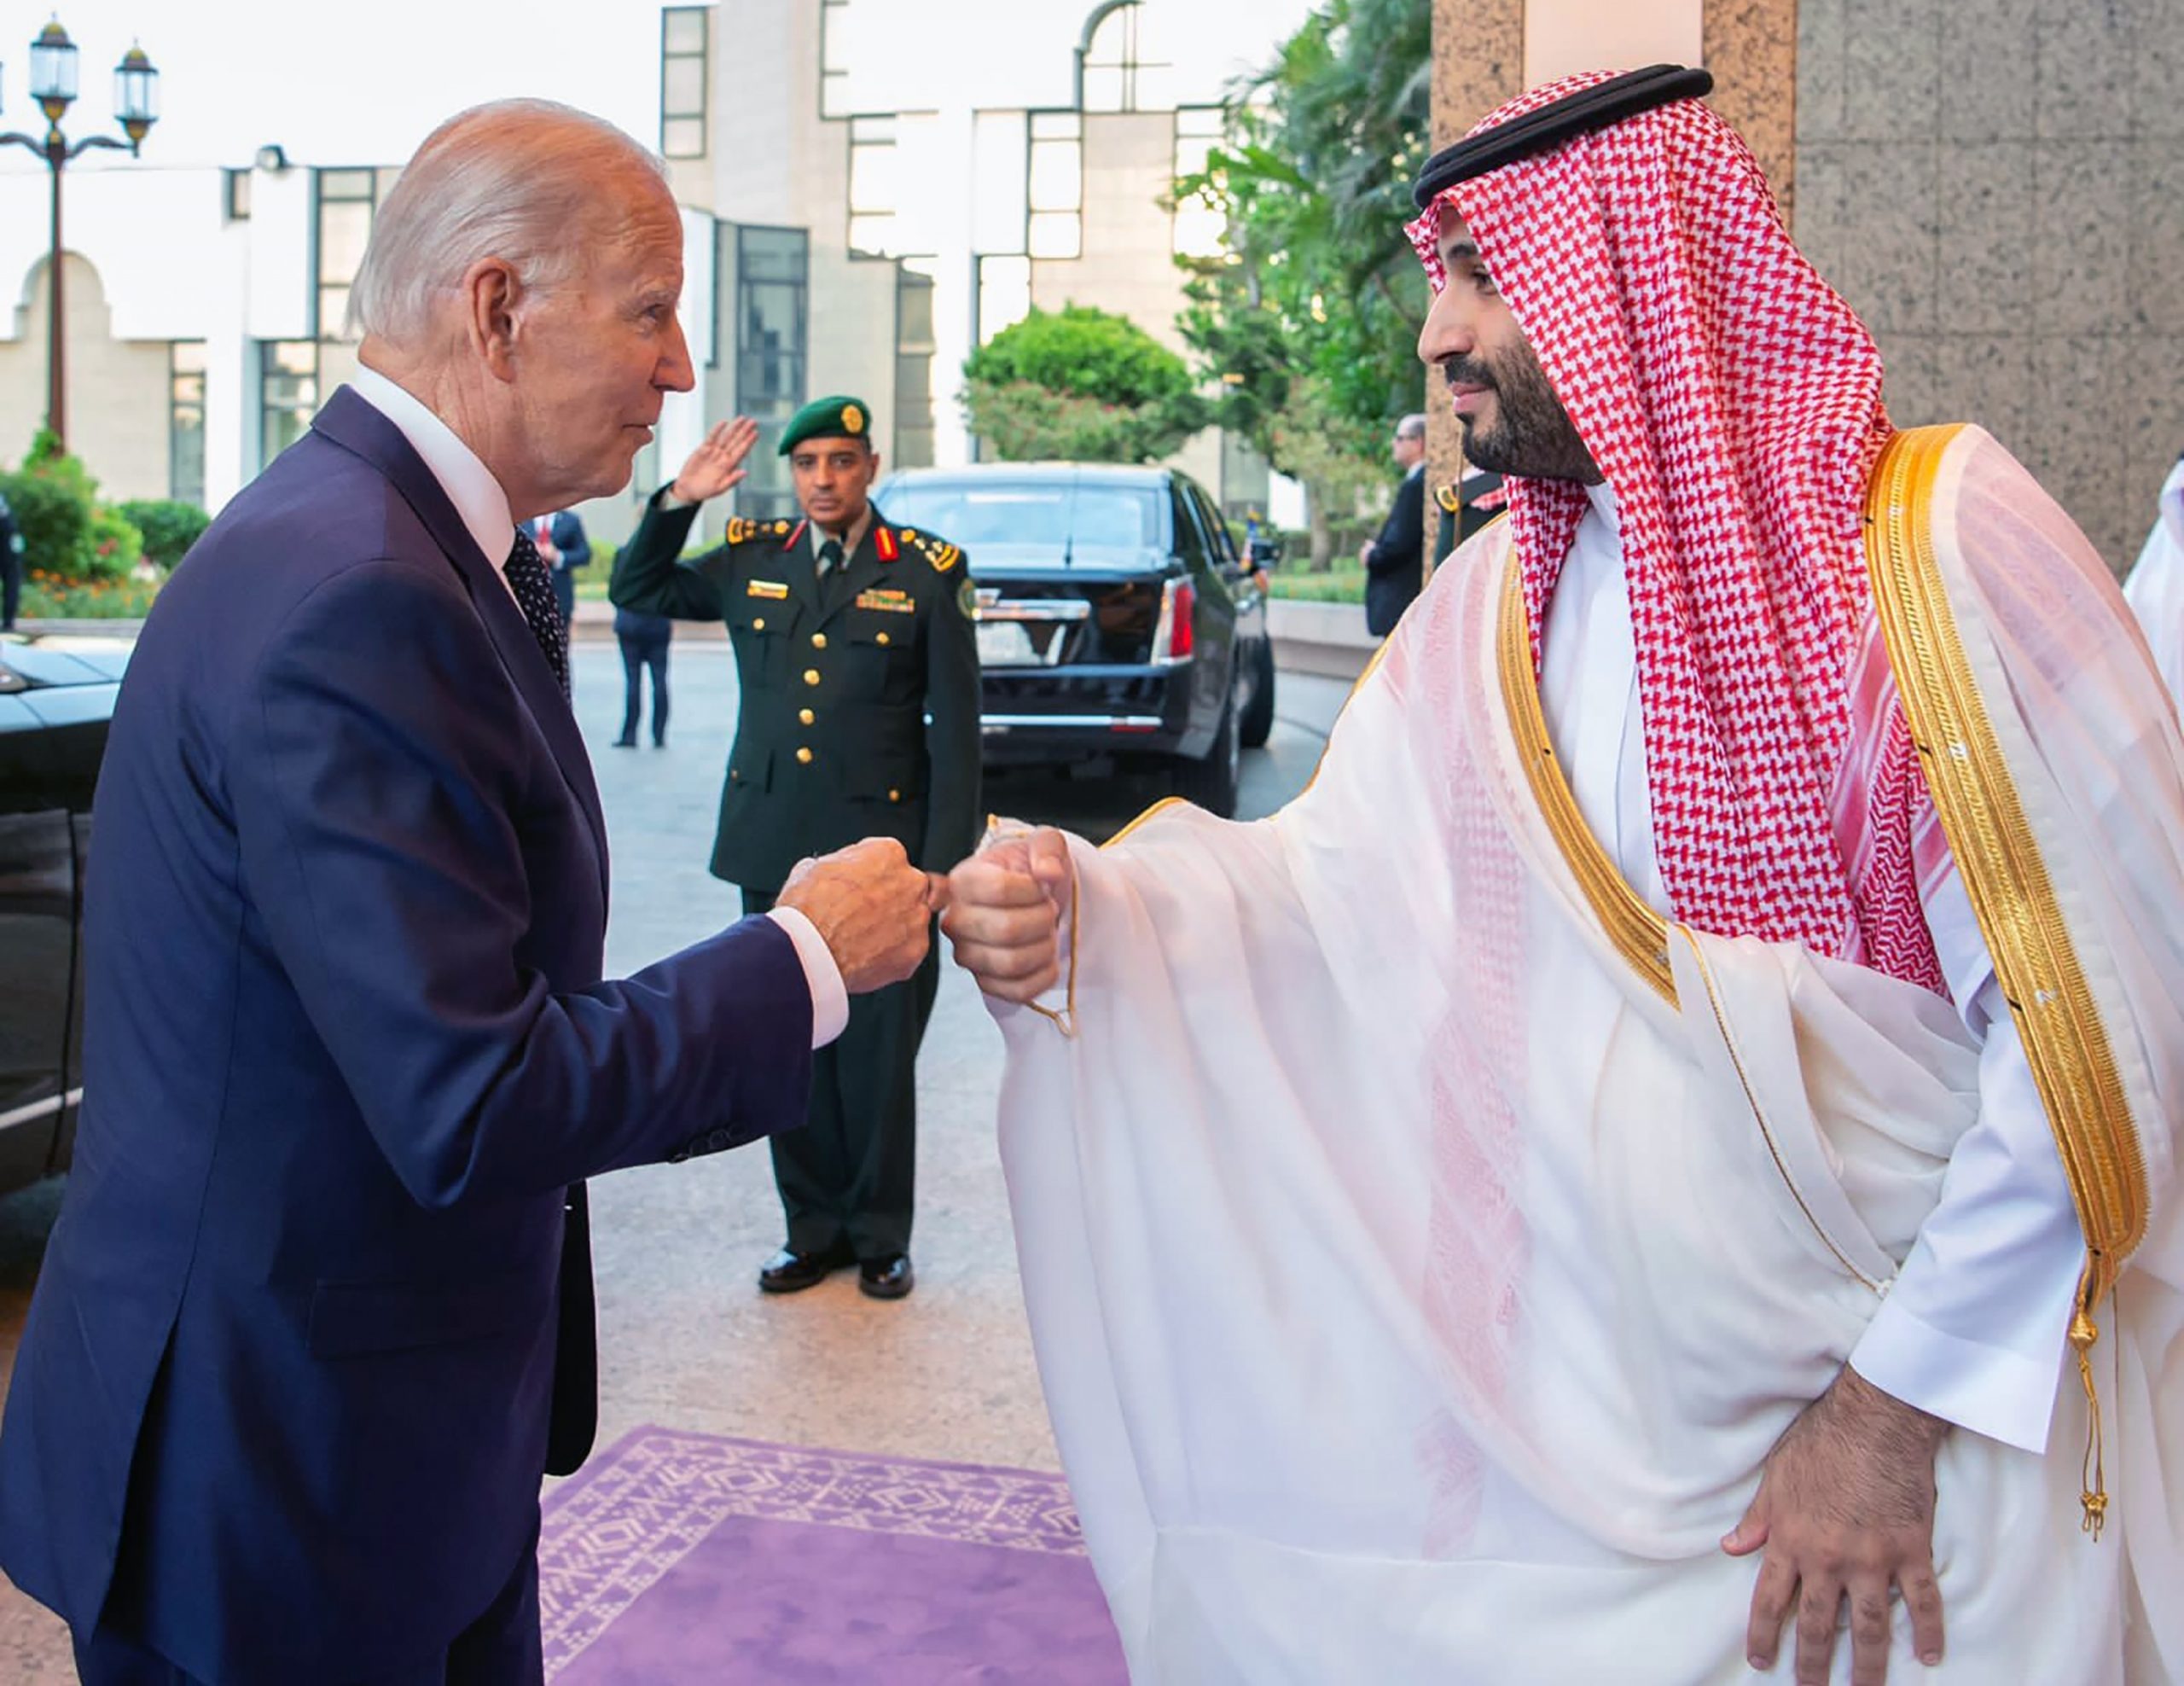 Biden shows no regrets over fist bump with MBS: ‘Happy to answer a question that matters’ - Washington Examiner